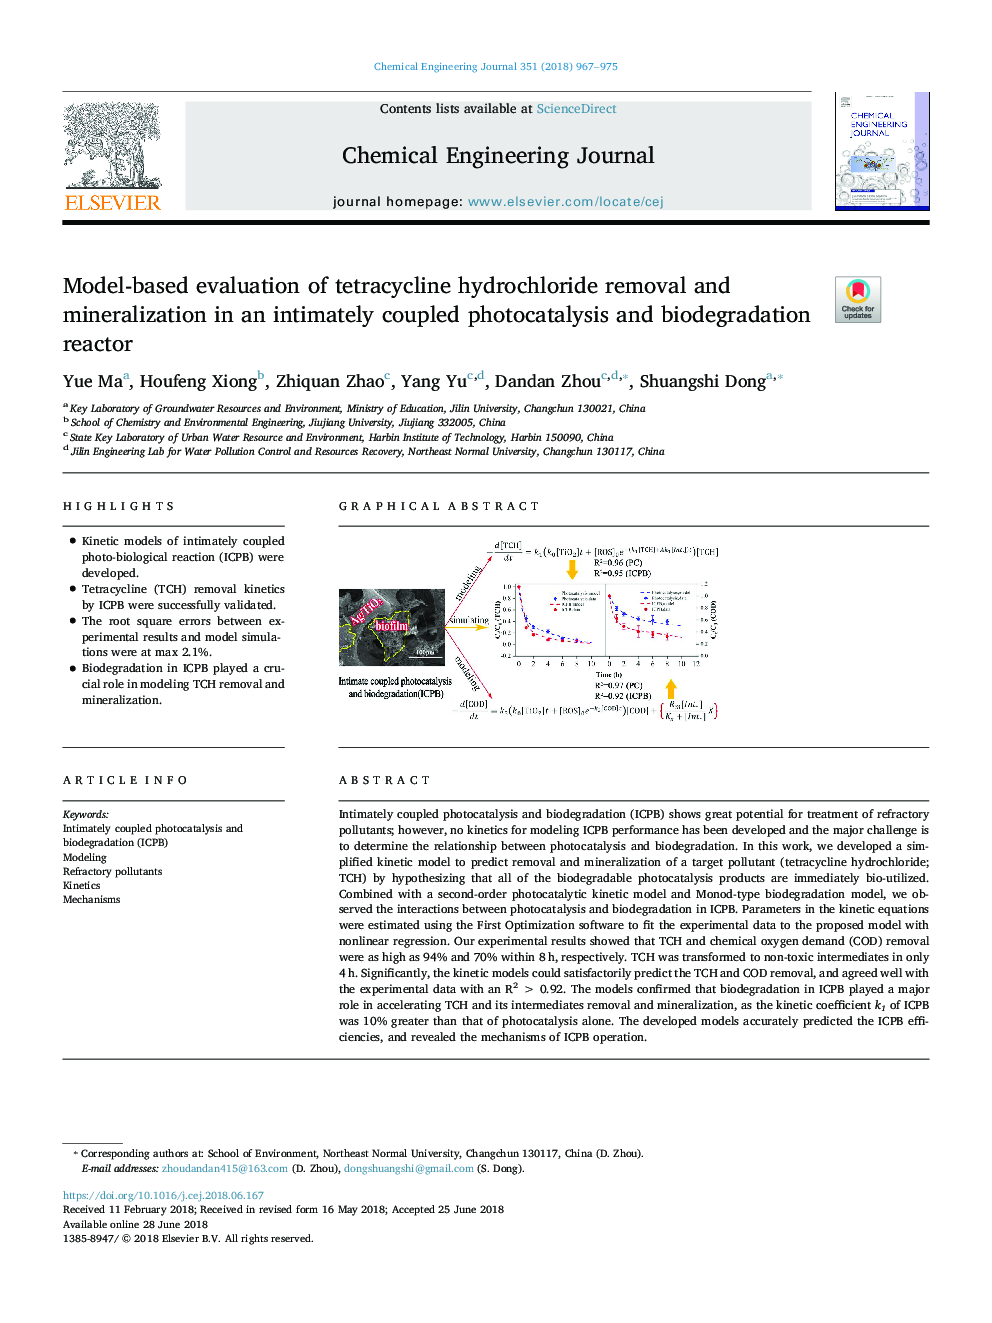 Model-based evaluation of tetracycline hydrochloride removal and mineralization in an intimately coupled photocatalysis and biodegradation reactor